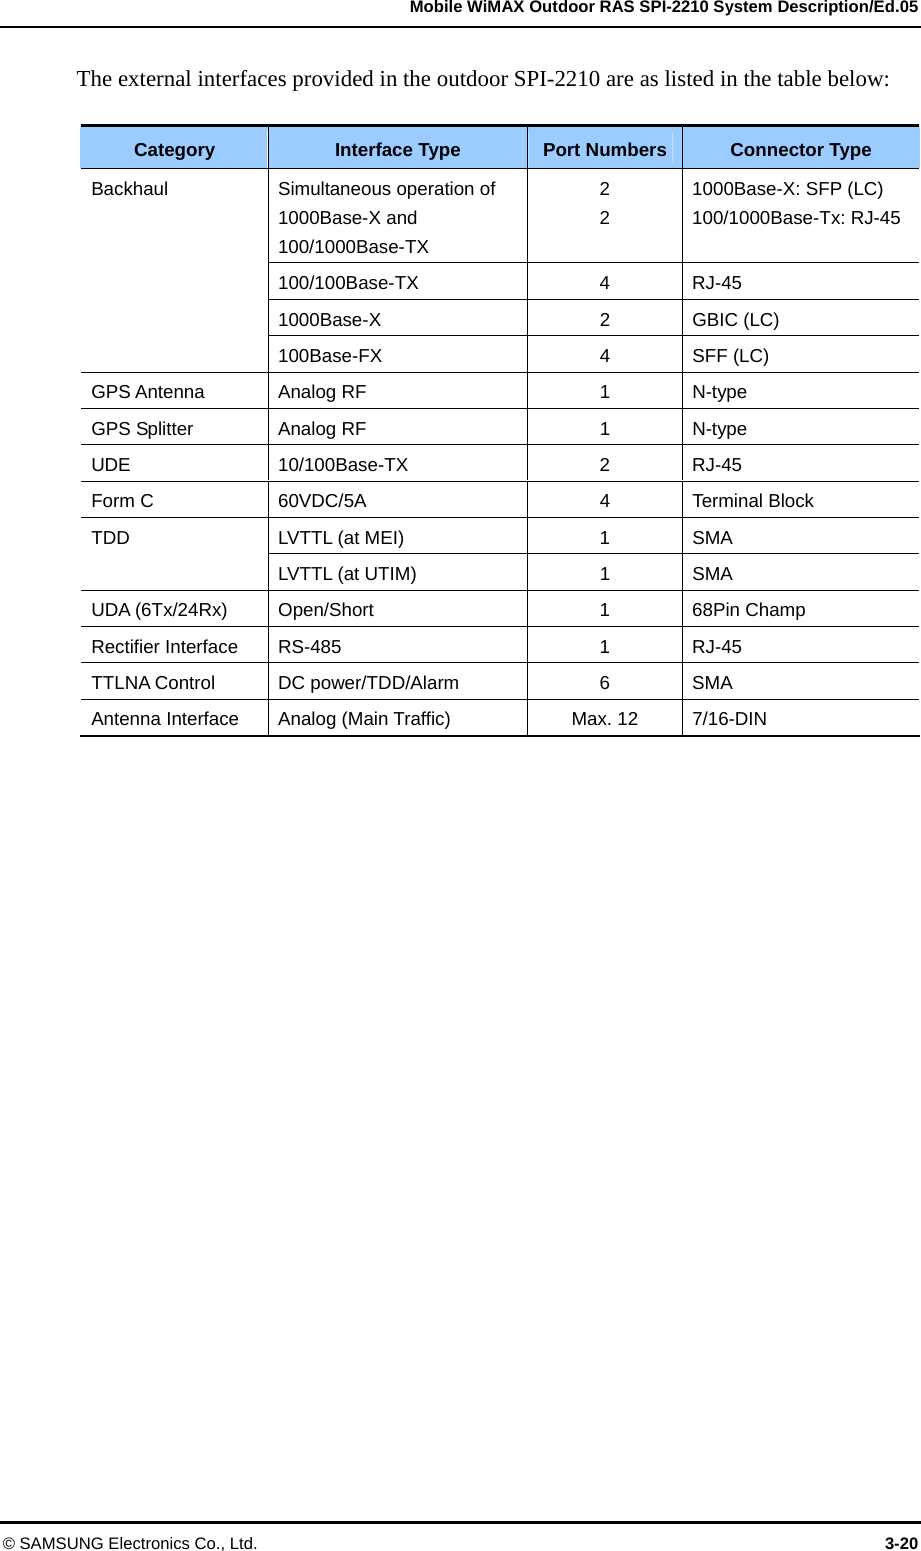   Mobile WiMAX Outdoor RAS SPI-2210 System Description/Ed.05 © SAMSUNG Electronics Co., Ltd.  3-20 The external interfaces provided in the outdoor SPI-2210 are as listed in the table below:  Category Interface Type Port Numbers Connector Type Simultaneous operation of 1000Base-X and 100/1000Base-TX 2 2 1000Base-X: SFP (LC) 100/1000Base-Tx: RJ-45100/100Base-TX 4 RJ-45 1000Base-X 2 GBIC (LC) Backhaul 100Base-FX 4 SFF (LC) GPS Antenna Analog RF  1  N-type GPS Splitter Analog RF  1  N-type UDE 10/100Base-TX 2 RJ-45 Form C 60VDC/5A 4 Terminal Block LVTTL (at MEI)  1  SMA TDD LVTTL (at UTIM)  1  SMA UDA (6Tx/24Rx)  Open/Short  1  68Pin Champ Rectifier Interface RS-485 1 RJ-45 TTLNA Control DC power/TDD/Alarm  6  SMA Antenna Interface Analog (Main Traffic)  Max. 12  7/16-DIN  